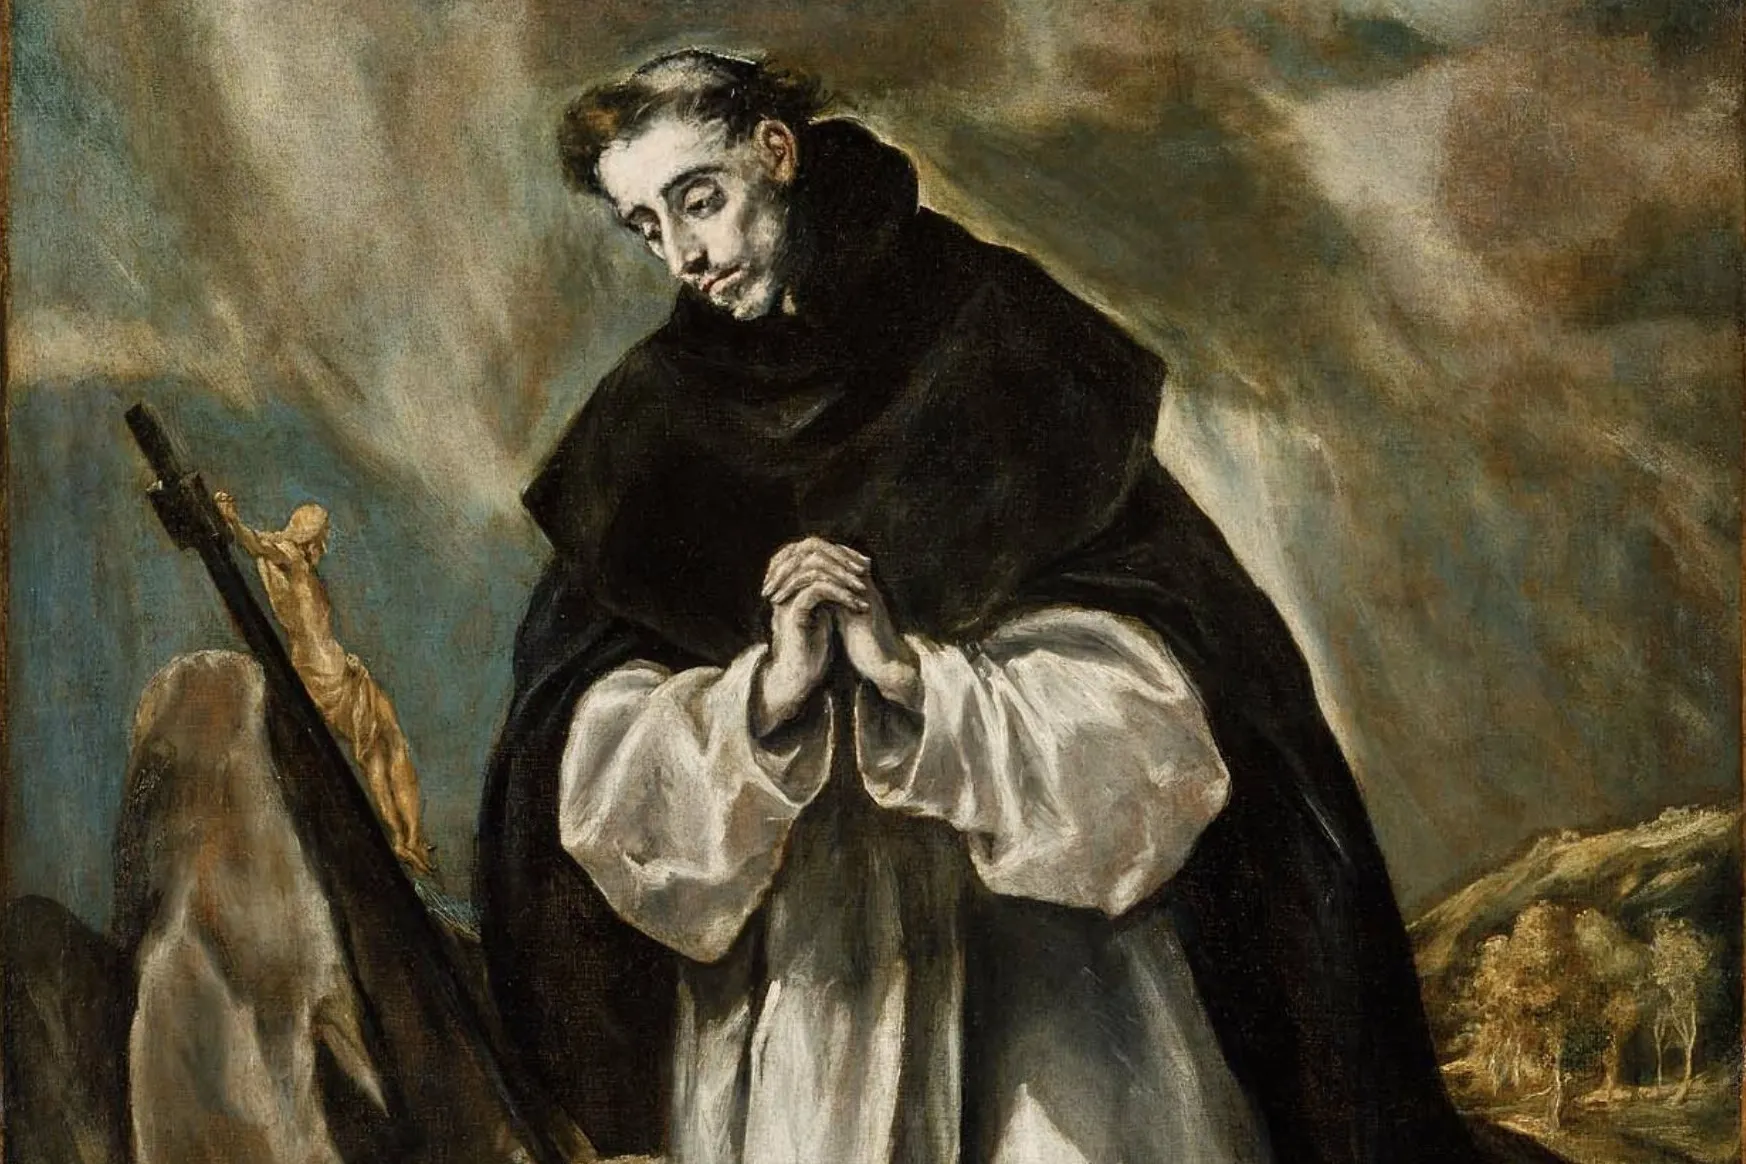 St. Dominic in prayer, by El Greco.?w=200&h=150